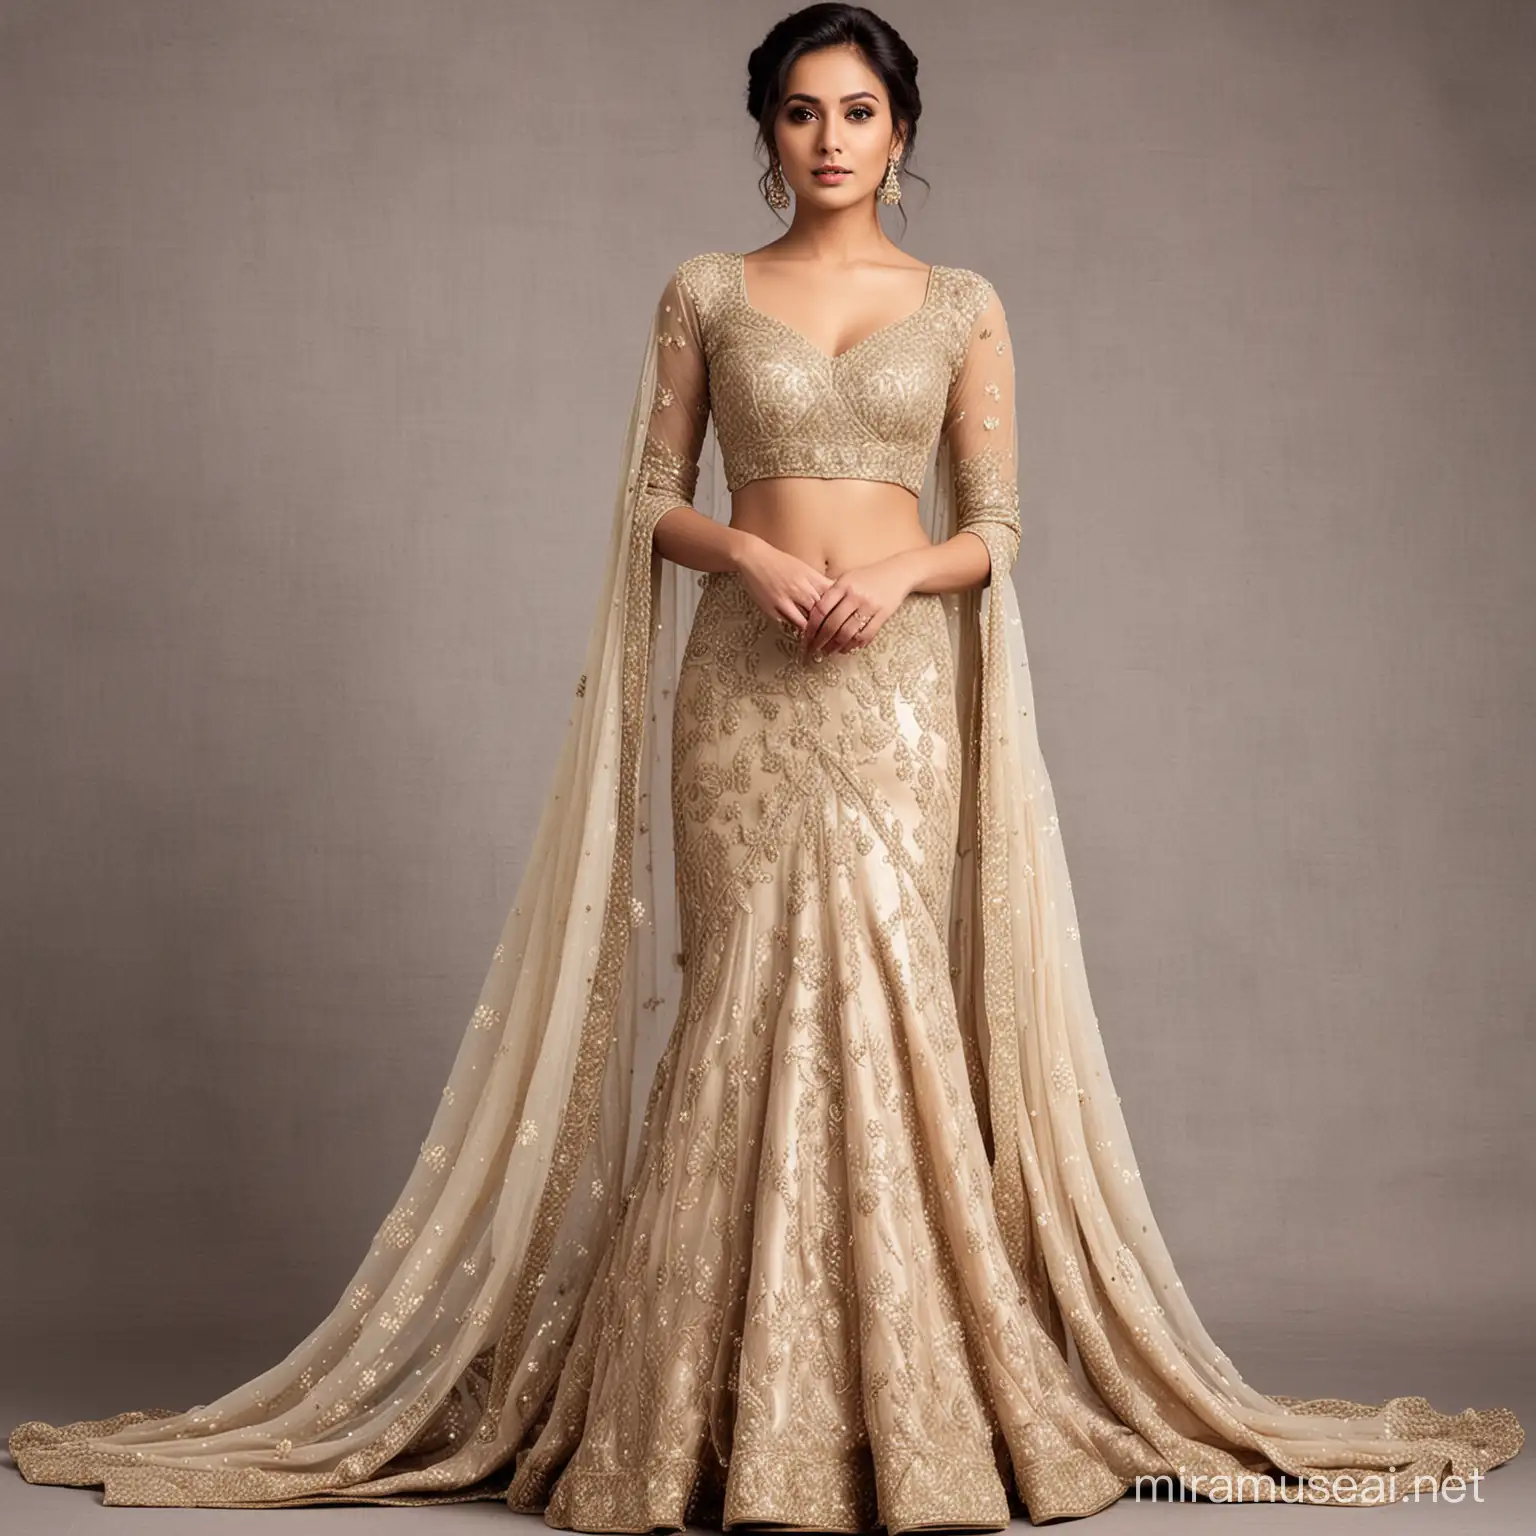 bridal saree-inspired gown